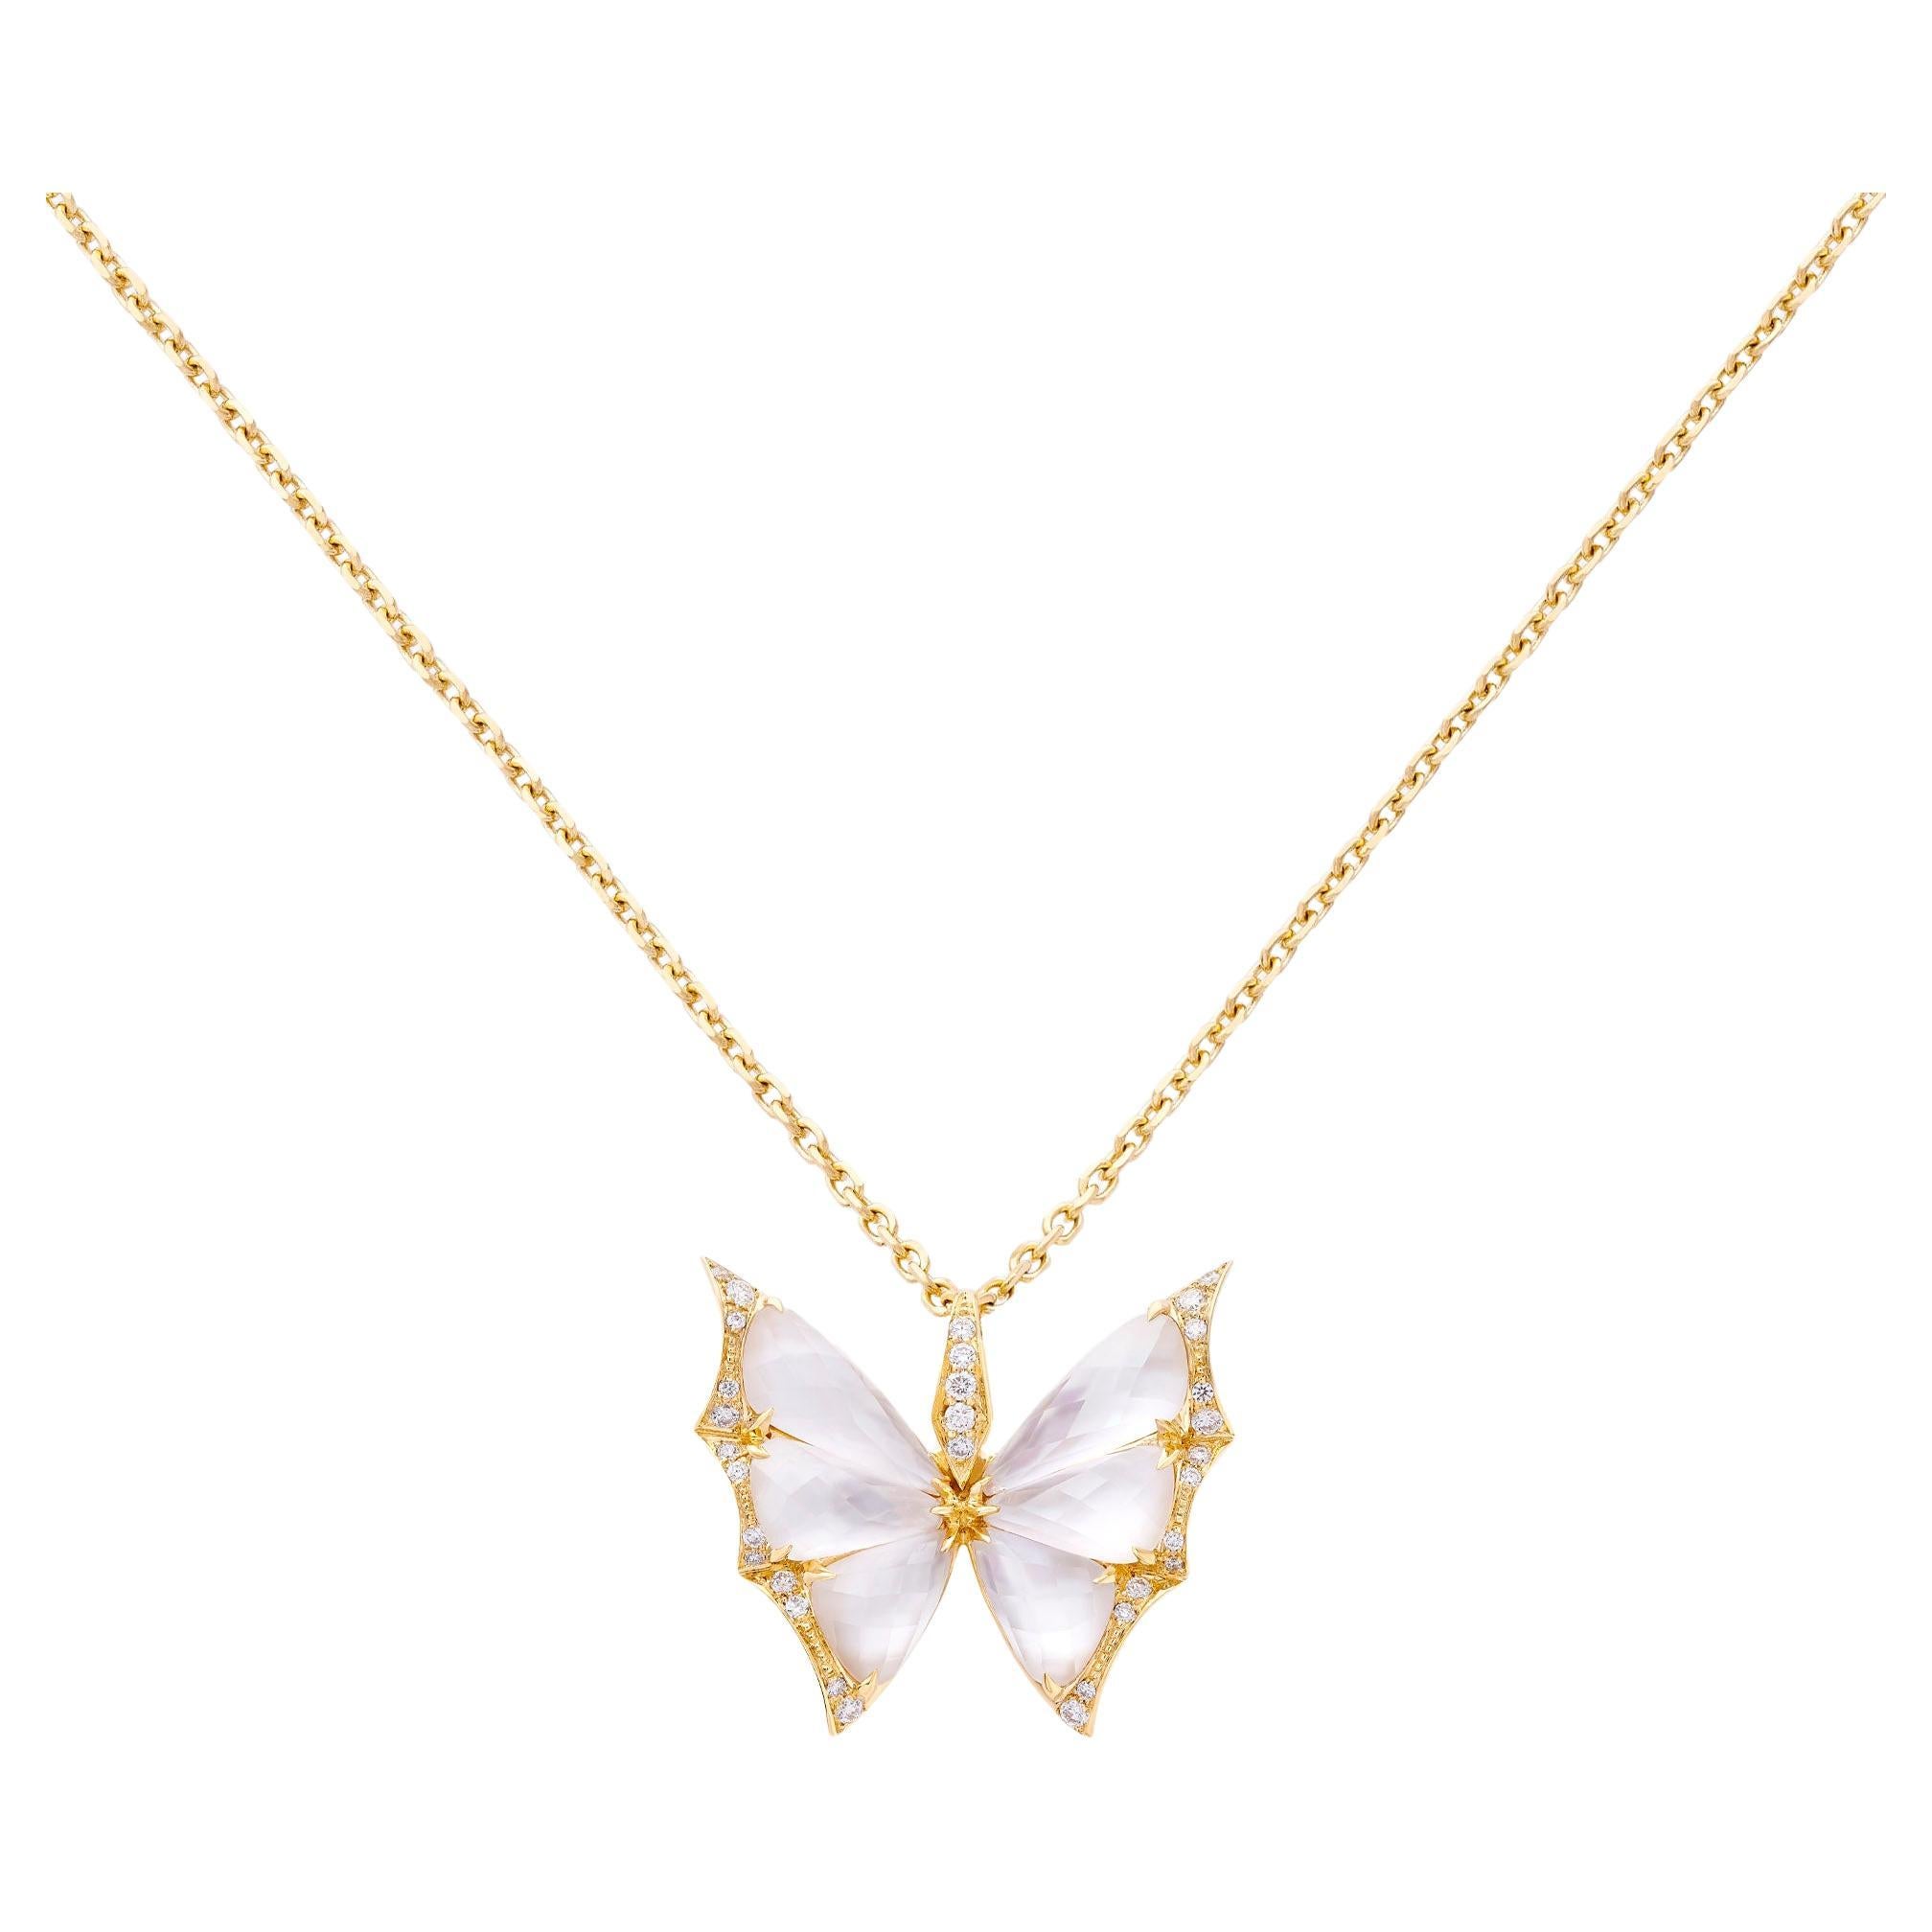 Crystal Haze Pendant - 18 Carat Yellow Gold and Mother of Pearl